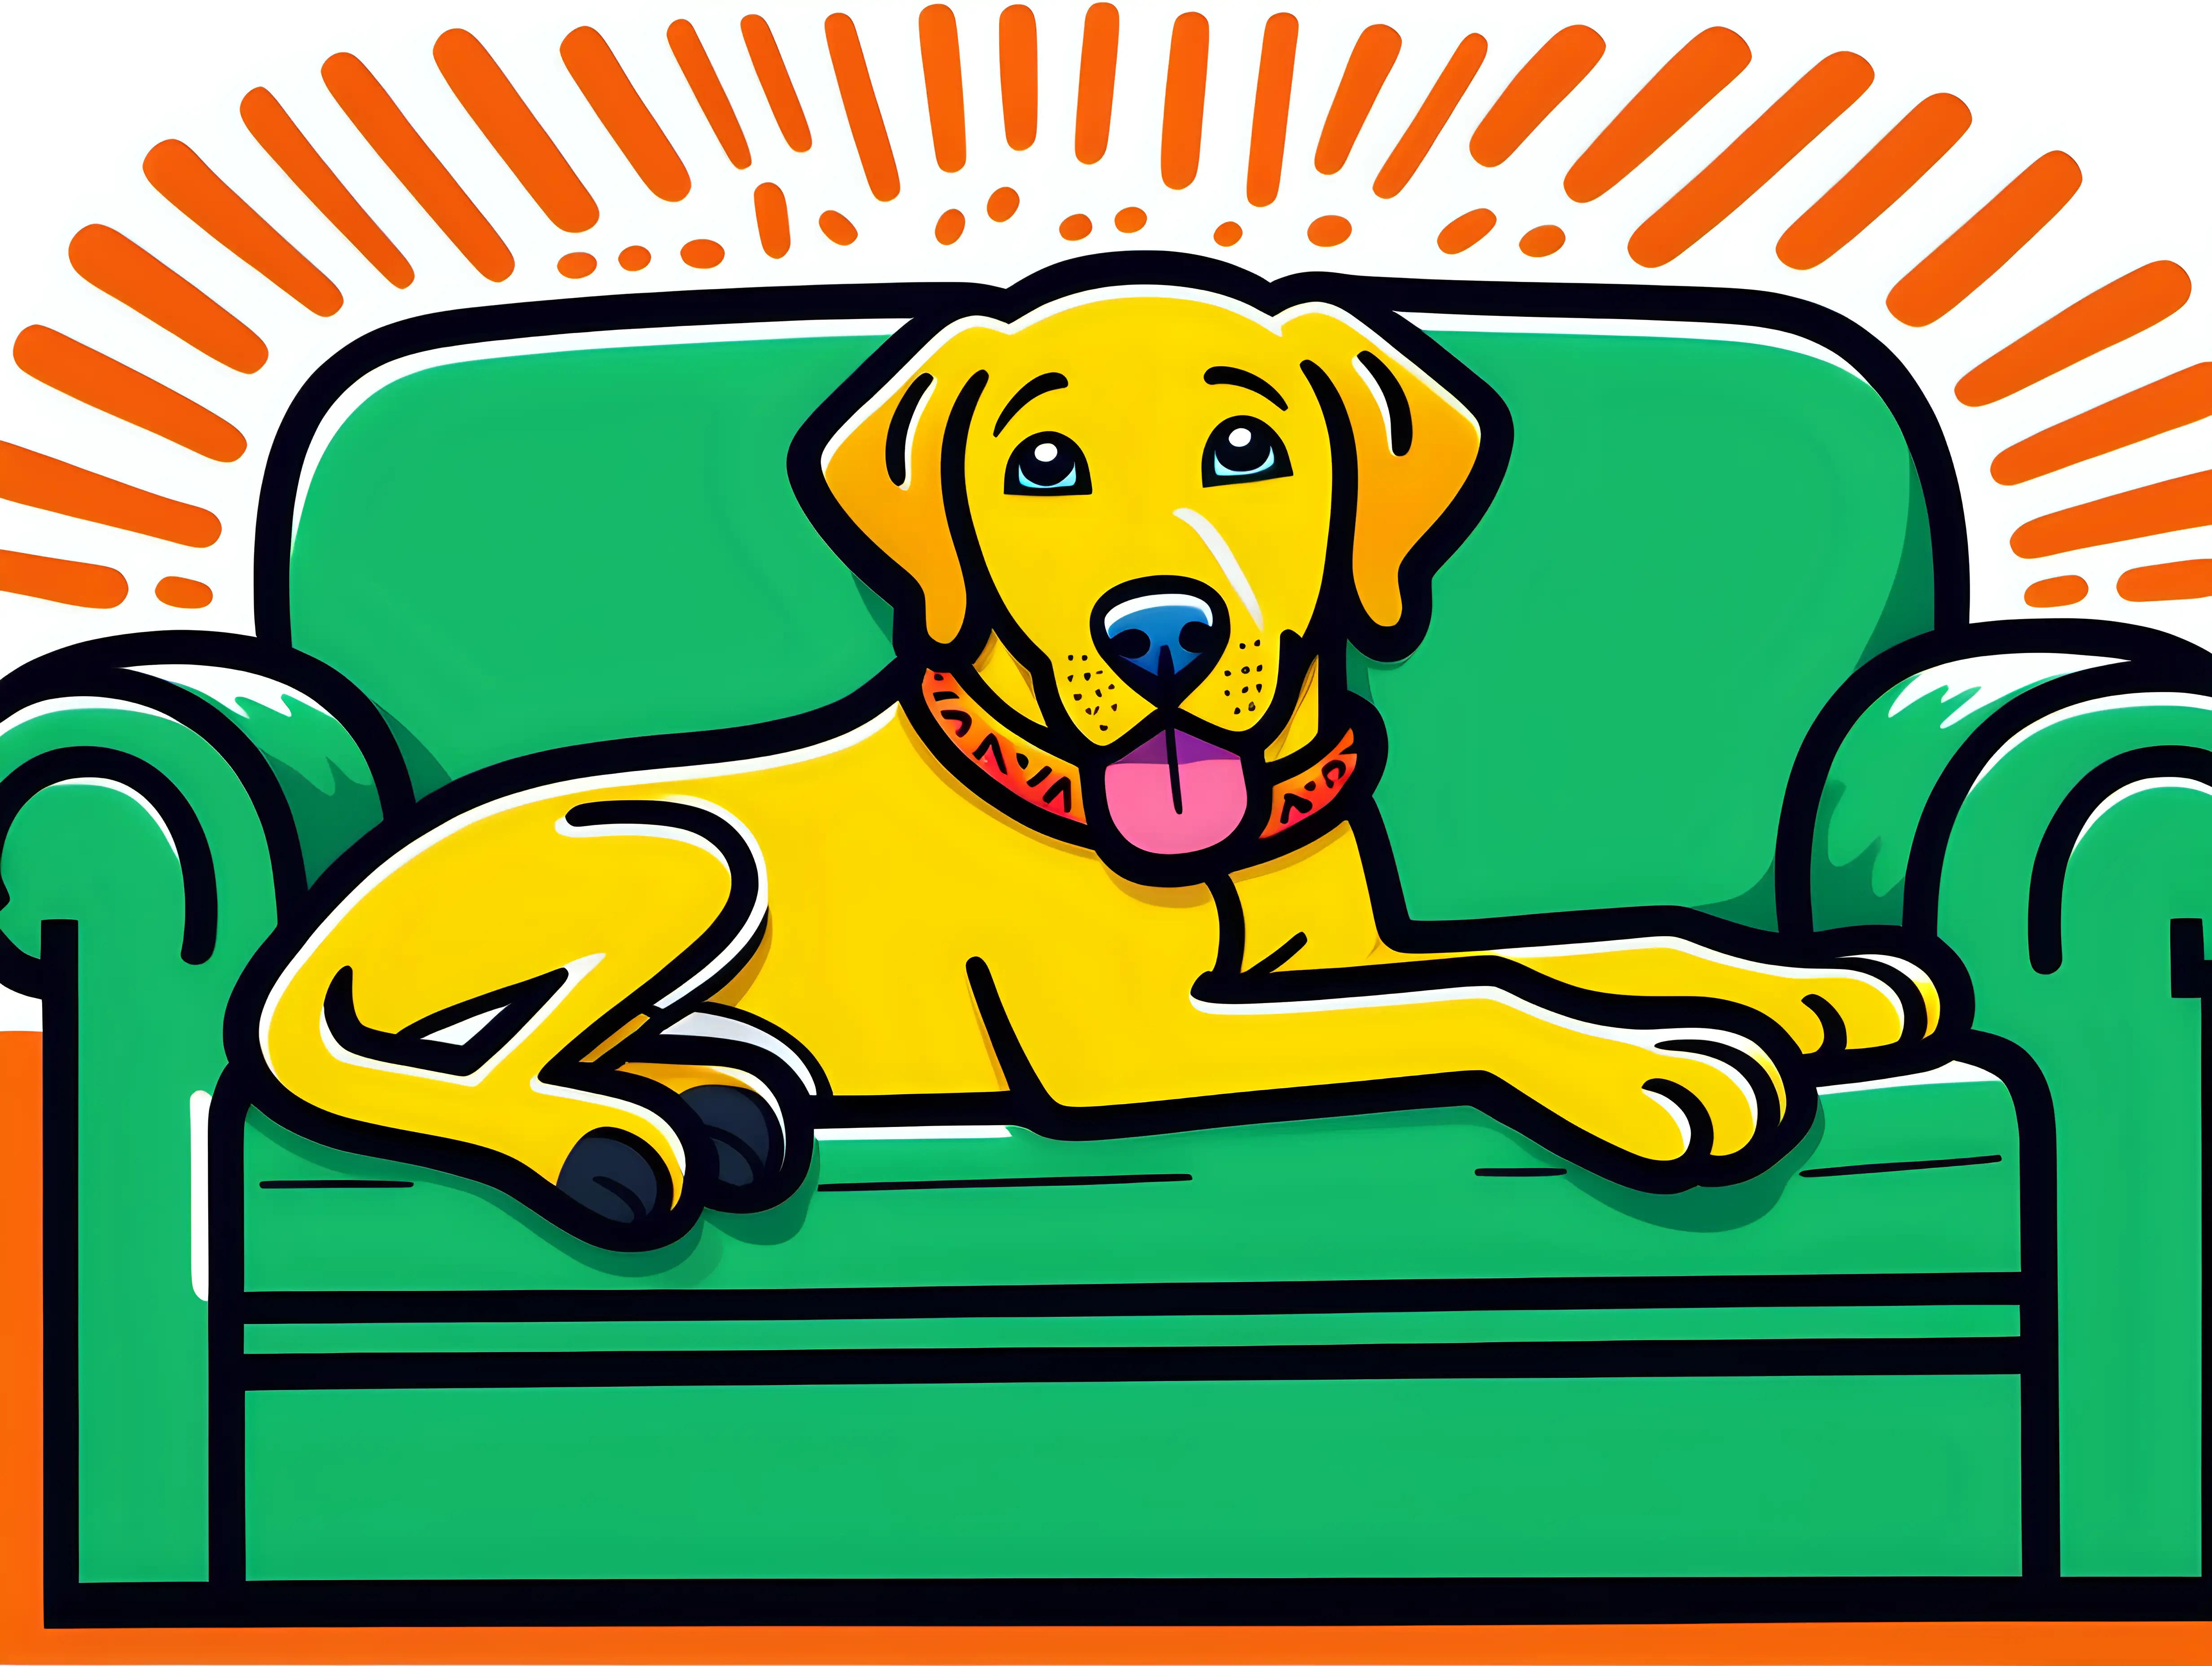 a cartoon character yellow labrador retriever laying on couch, vibrant color, white background, in the style of Keith Haring